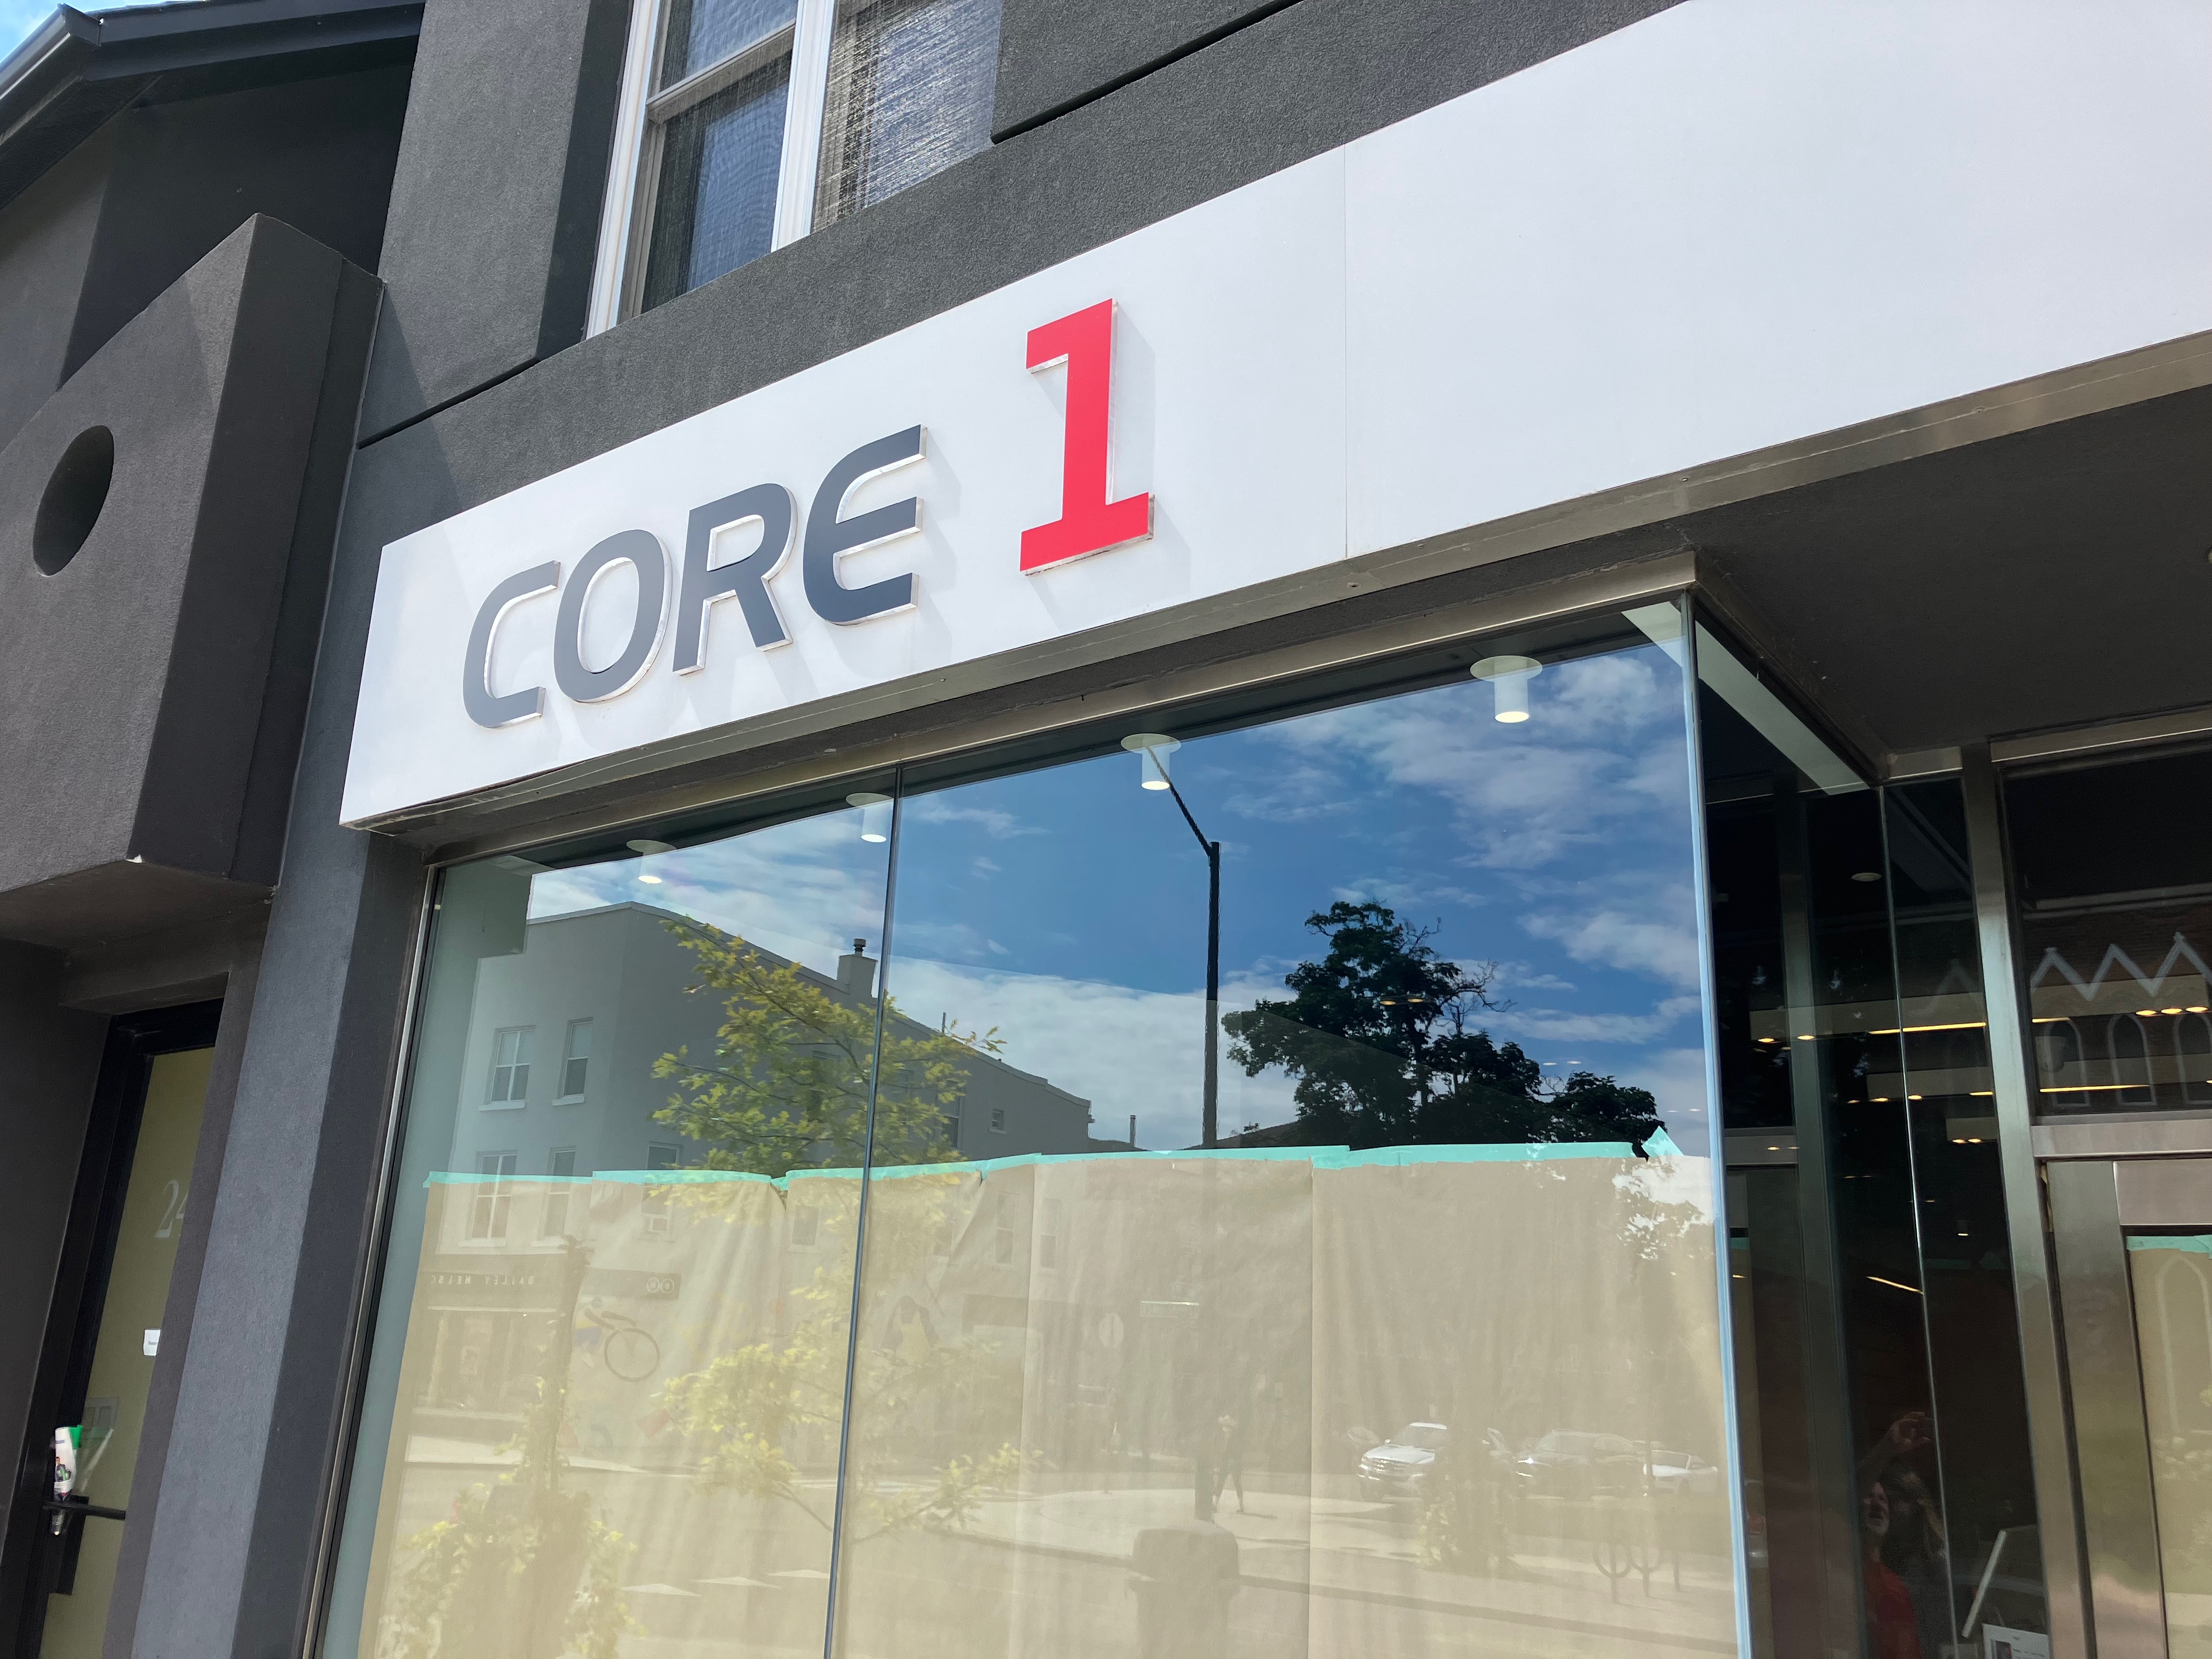 Core 1 closed | Shop papered over | Chris Stoate